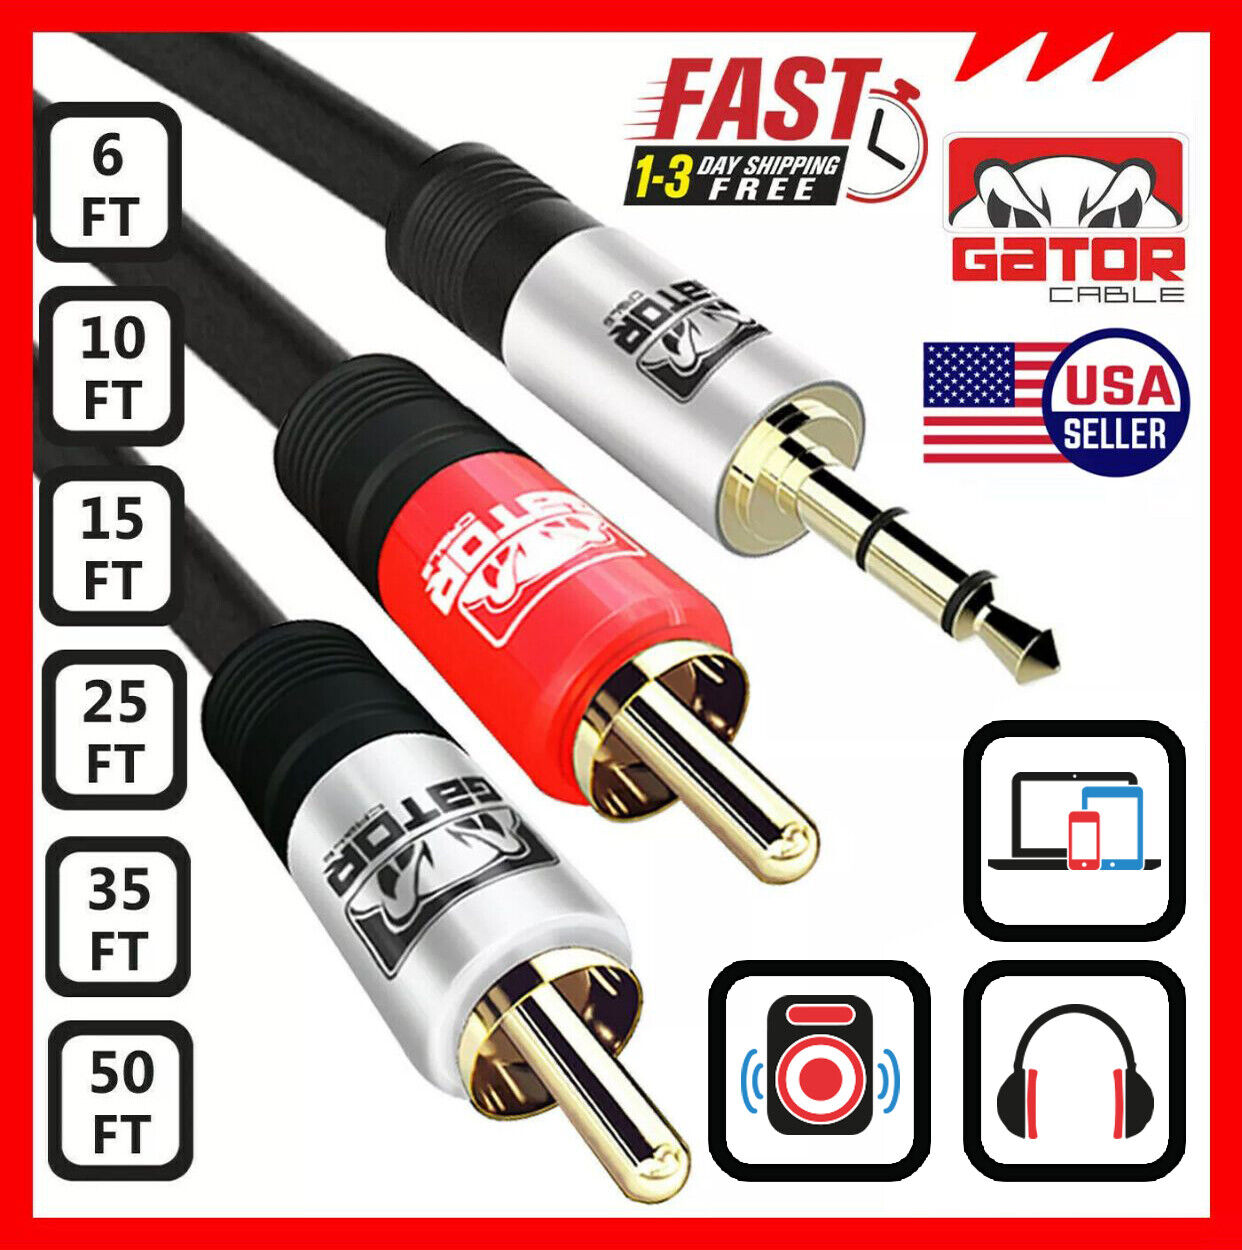 AUX Auxiliary 3.5mm Audio Male to 2 RCA Y Male Stereo Cable Cord Wire Plug Gator Cable AUX-3.5MM-To-2RCA-Cable